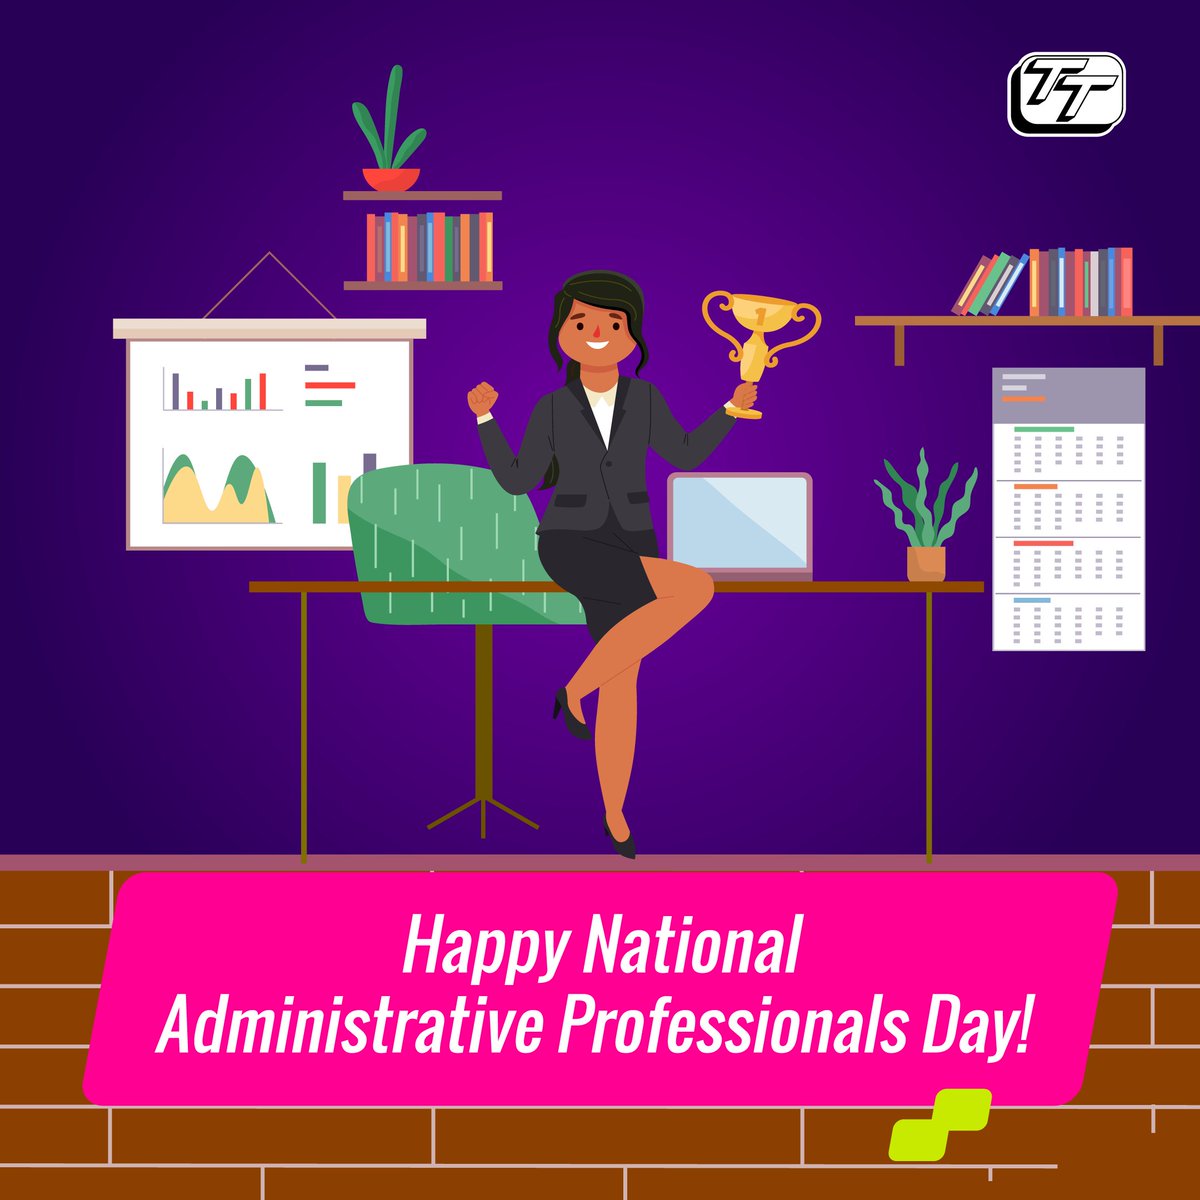 Celebrate your receptionists, managers, administrators & assistants for all the hard work they do! ⭐️

#administration #adminjobs #adminprofessionalsday